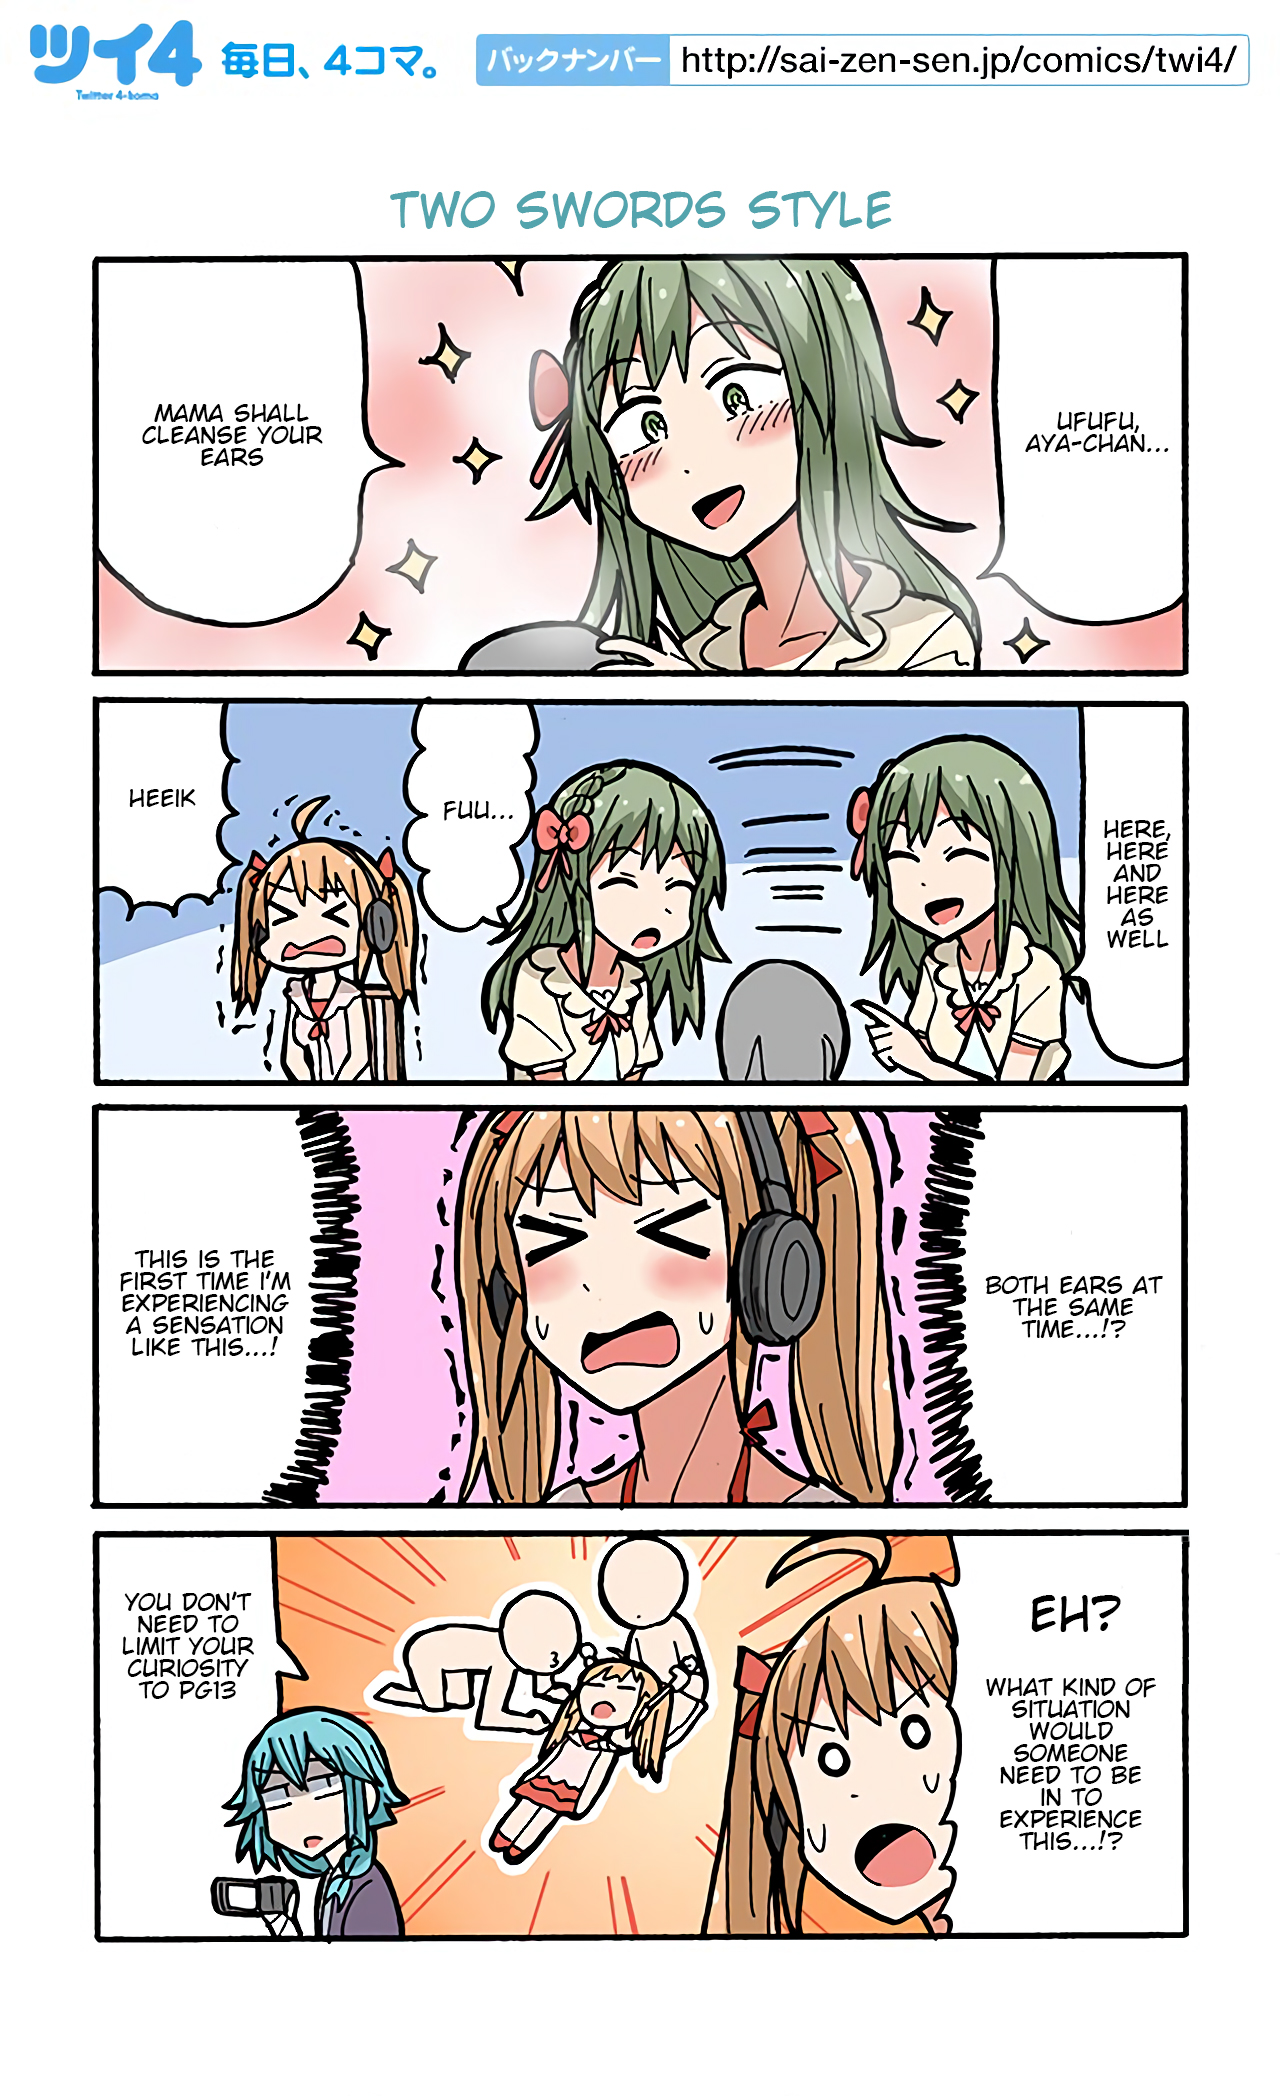 Lazy Idol Yamada's Life as a Youtuber Ch. 67 Two Swords Style